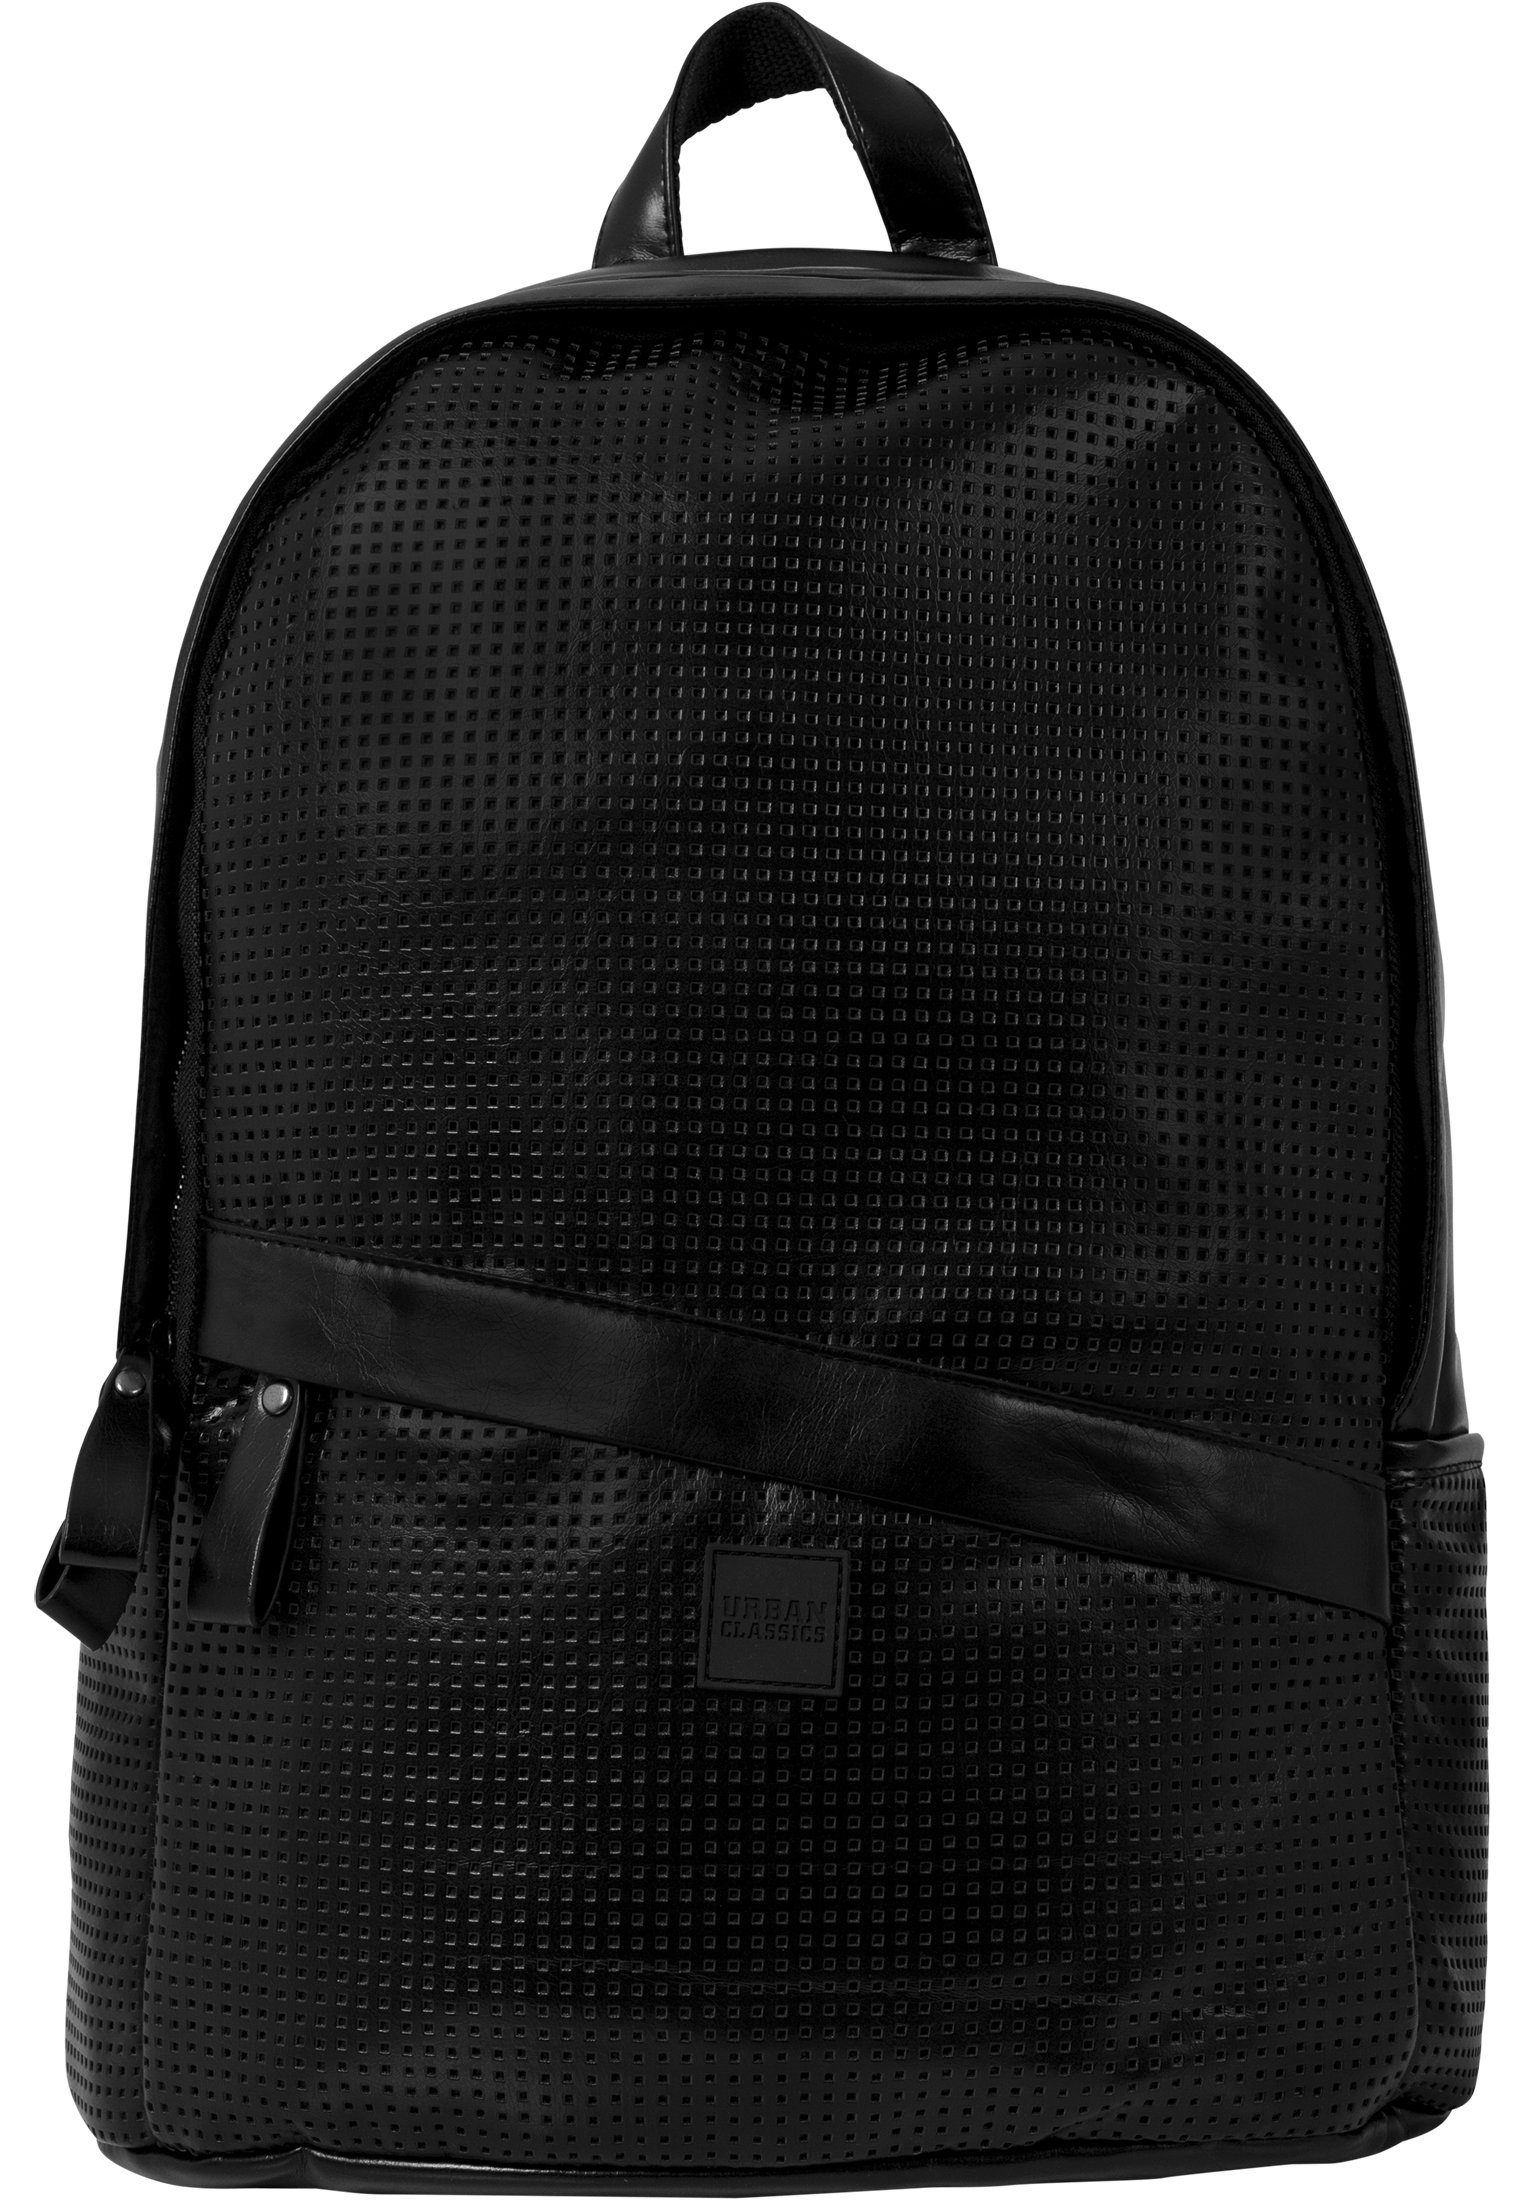 URBAN CLASSICS Rucksack Unisex Perforated Synthetic Leather Backpack